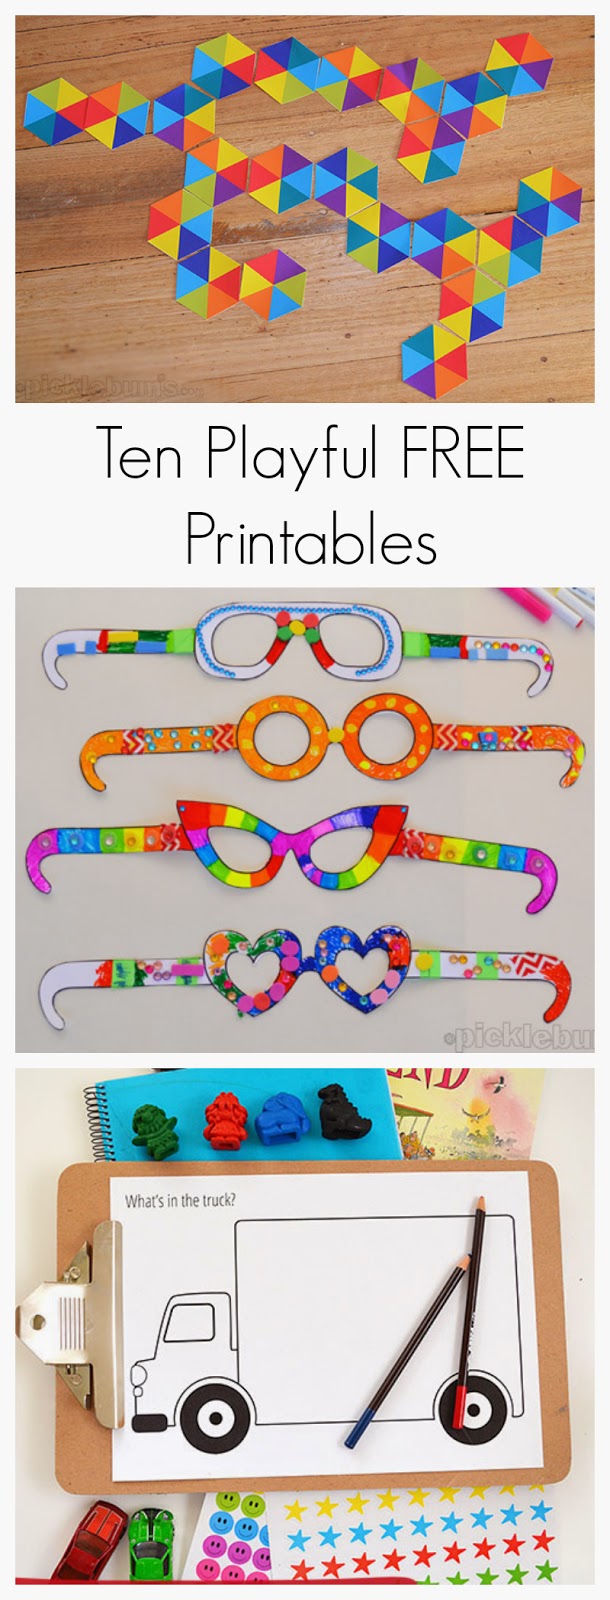 {Guest Post}  Ten Playful Free Printables for Kids by Picklebums for Fun at Home with Kids